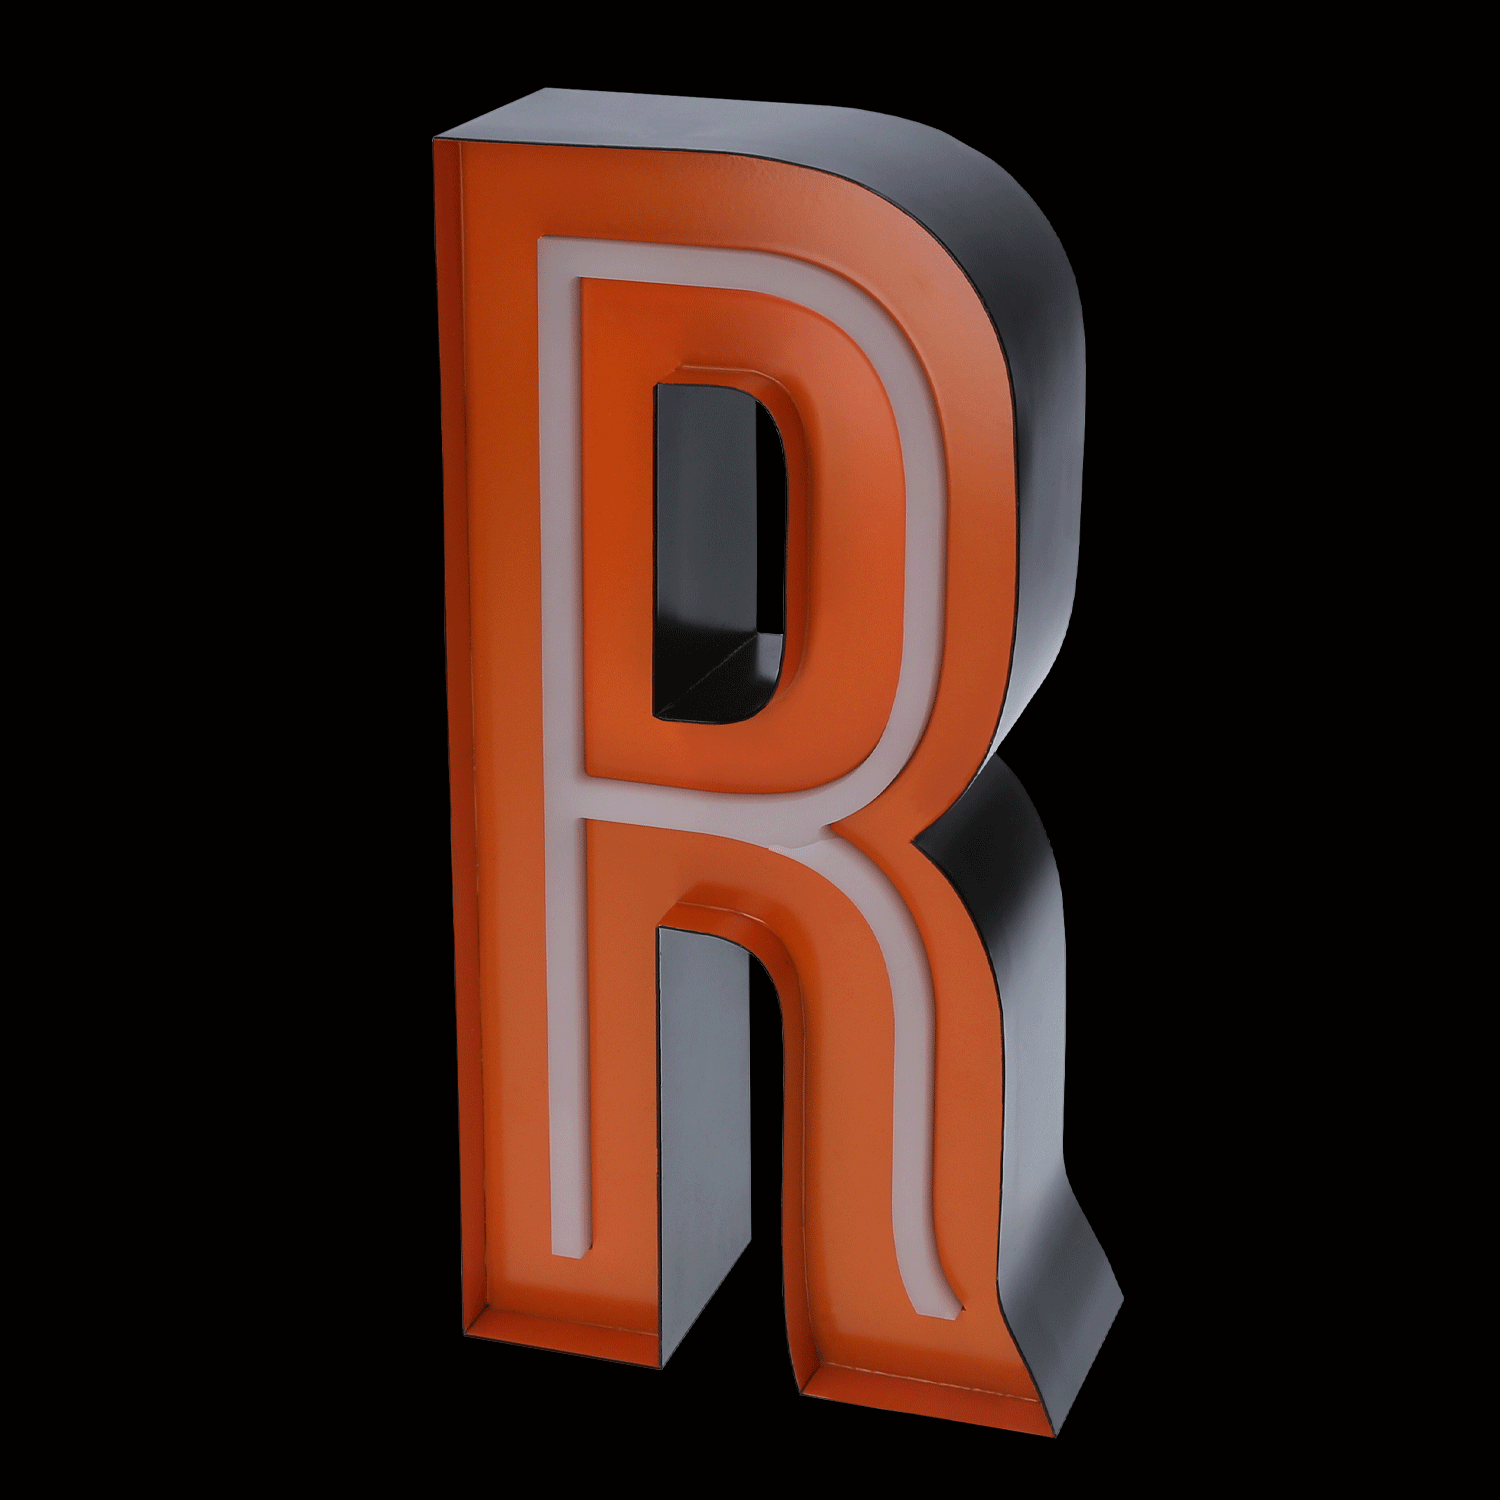 Marquee_R_Painted_Animated_WEB_1500x1500.gif